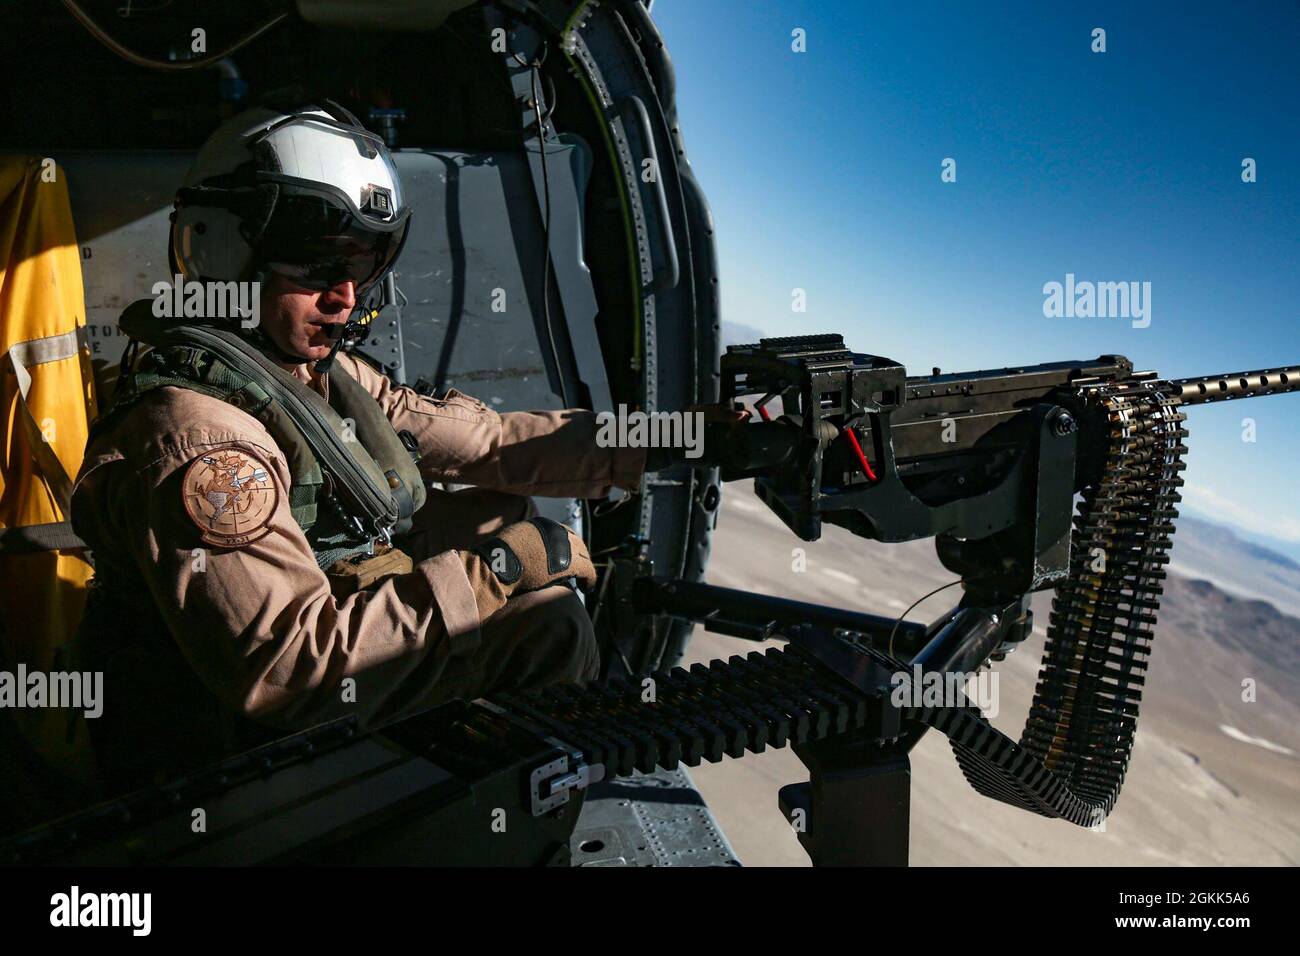 210510-N-DN347-1075 FALLON, Nev. (May 11, 2021)  Naval Aircrewman (Helicopter) 1st Class Ian Hamlett, from Santa Cruz, Calif., mans a GAU-21 machine gun in a MH-60S Knighthawk helicopter assigned to the “Chargers” of Helicopter Sea Combat Squadron (HSC) 14, during overland Helicopter Advanced Readiness Program (HARP) training at Naval Air Station, Fallon. HARP is hosted by Helicopter Sea Combat Weapons School Pacific (HSCWSP) and designed to enhance the HSC Community’s realistic war fighting training via joint operations in an austere environment. HSC-14 provides vertical lift search and rescu Stock Photo